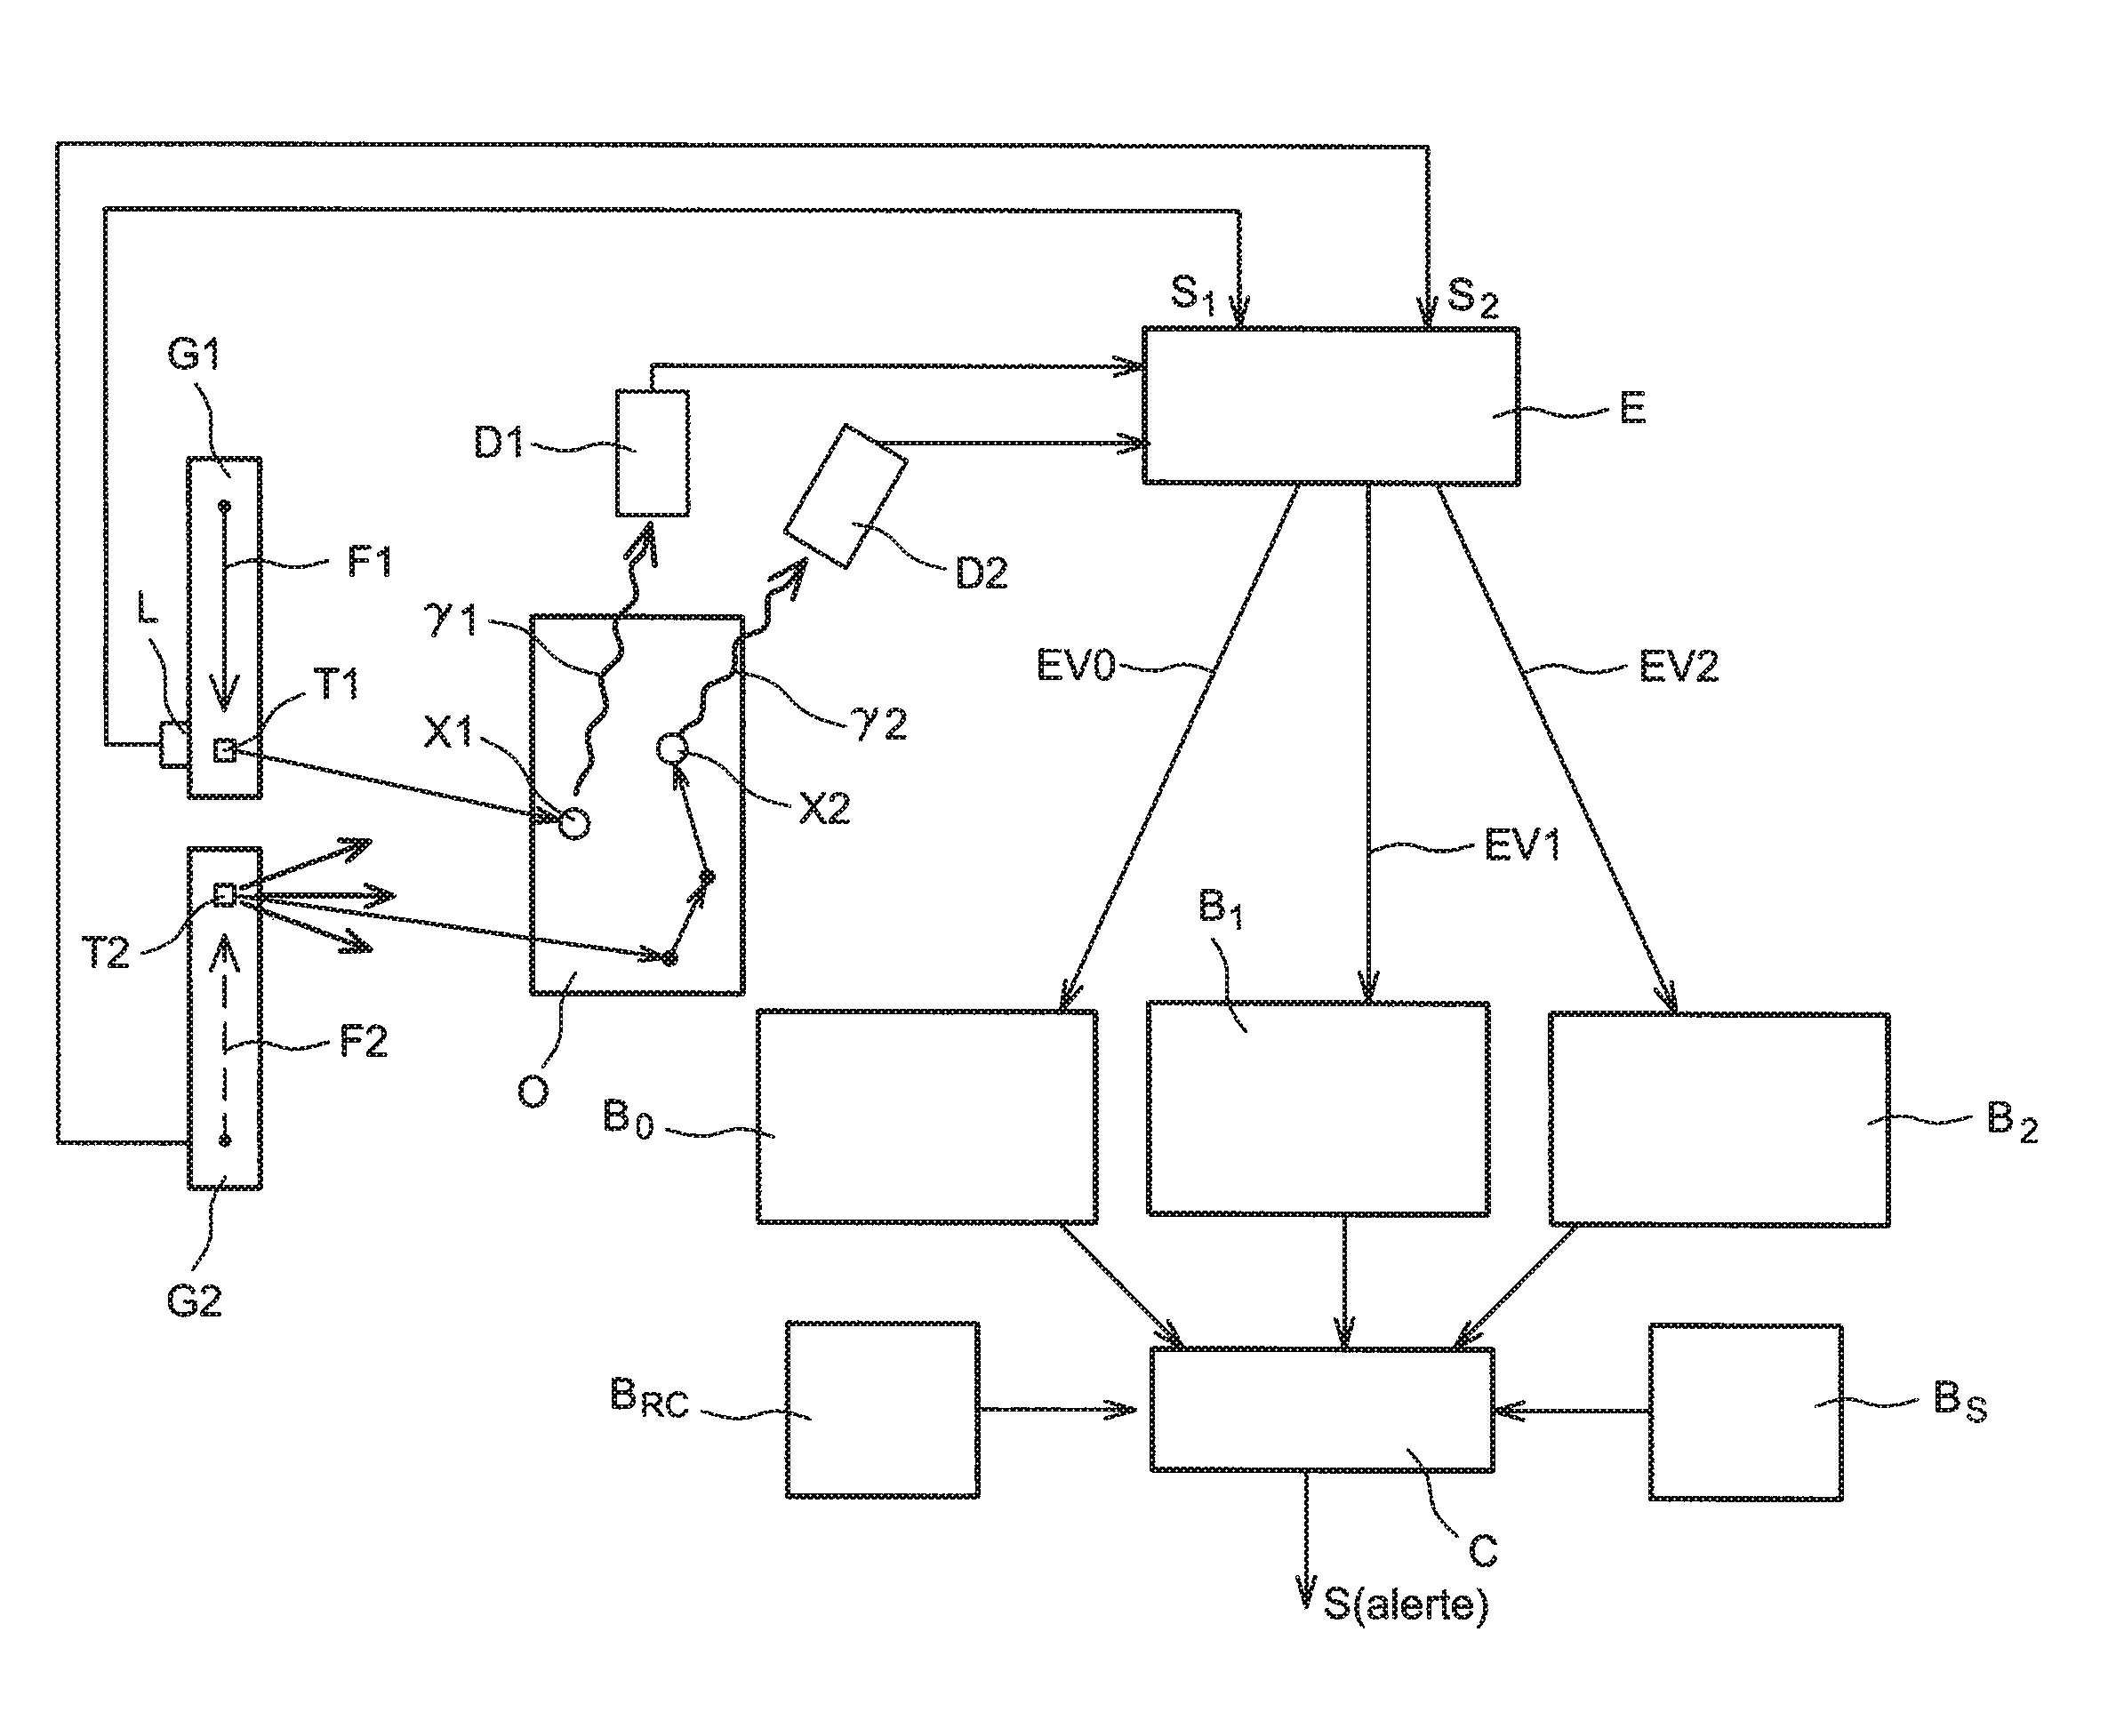 Non-intrusive method for detection of chemical elements